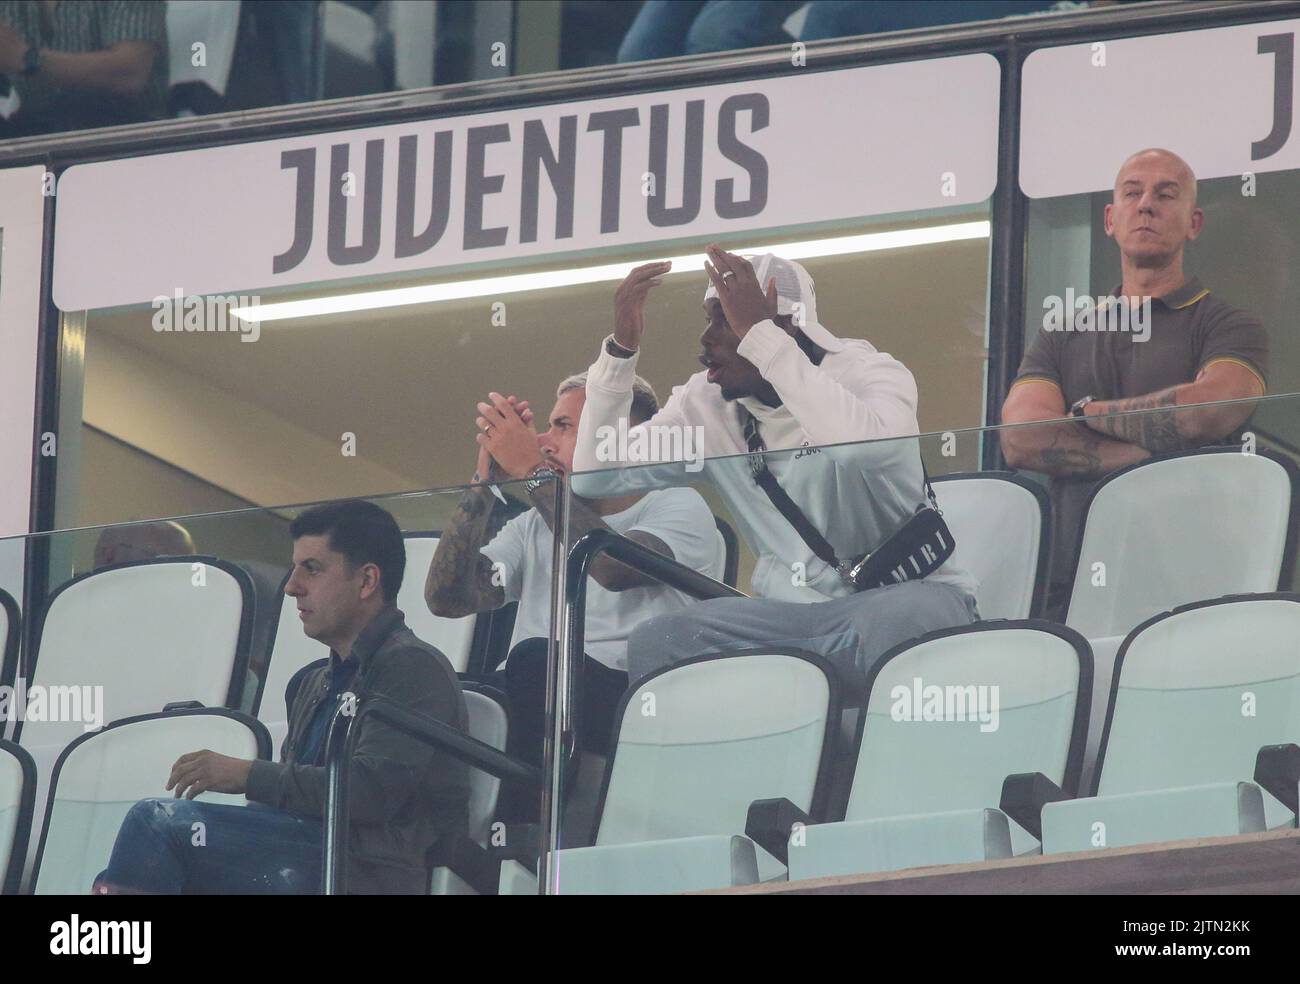 Turin, Italy. August 31, 2022  Leonardo Paredes of Juventus Fc and Paul Pogba of Juventus Fc during the Italian Serie A, football match between Juventus Fc and Spezia Calcio on August 31, 2022 at Allianz Stadium, Turin, Italy. Photo Nderim Kaceli Stock Photo